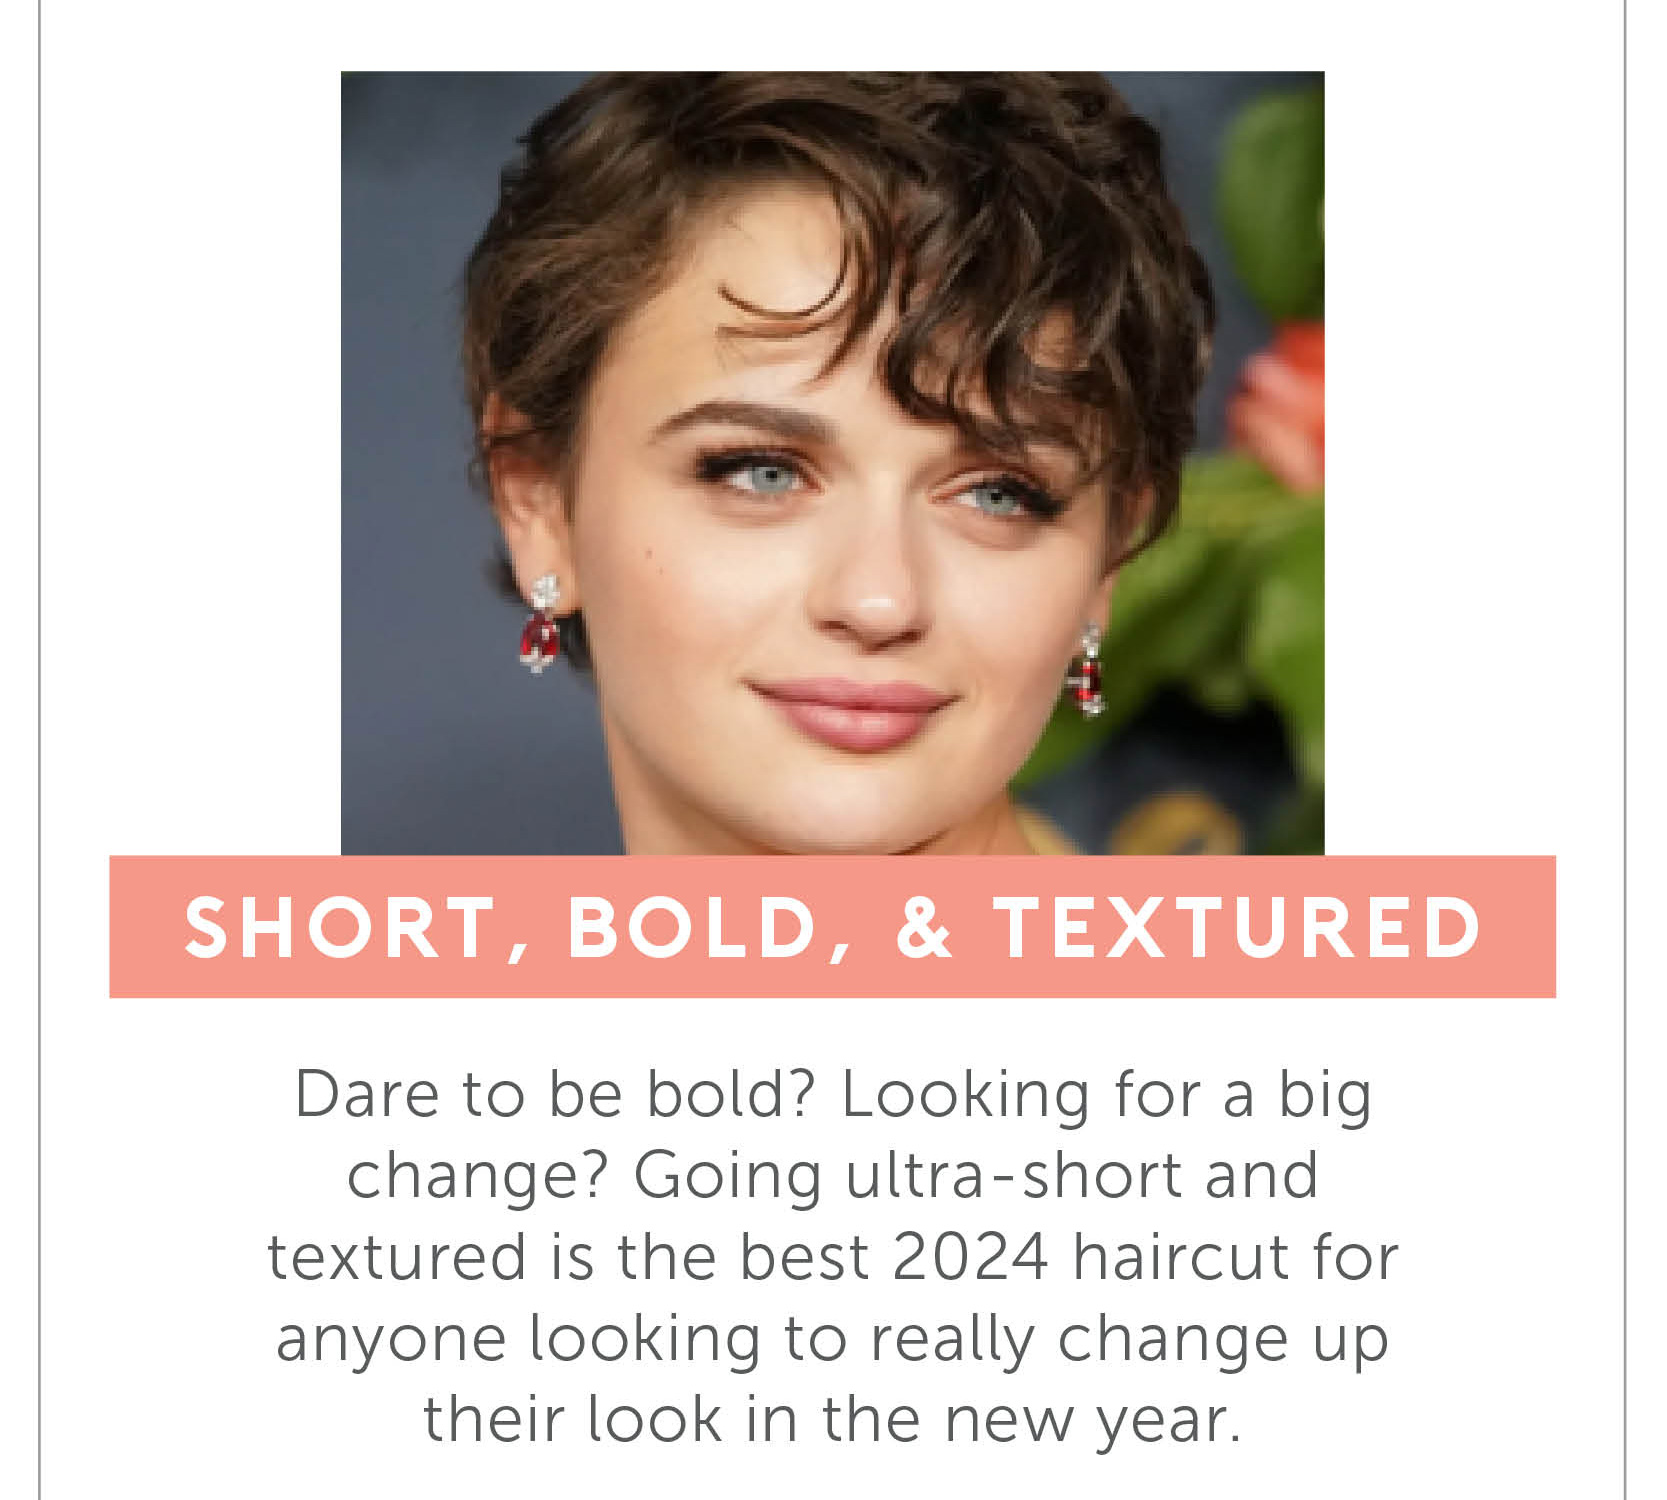 Short, Bold, and Textured - Dare to be bold? Looking for a big change? Going ultra-short and textured is the best 2024 haircut for anyone looking to really change up their look in the new year.